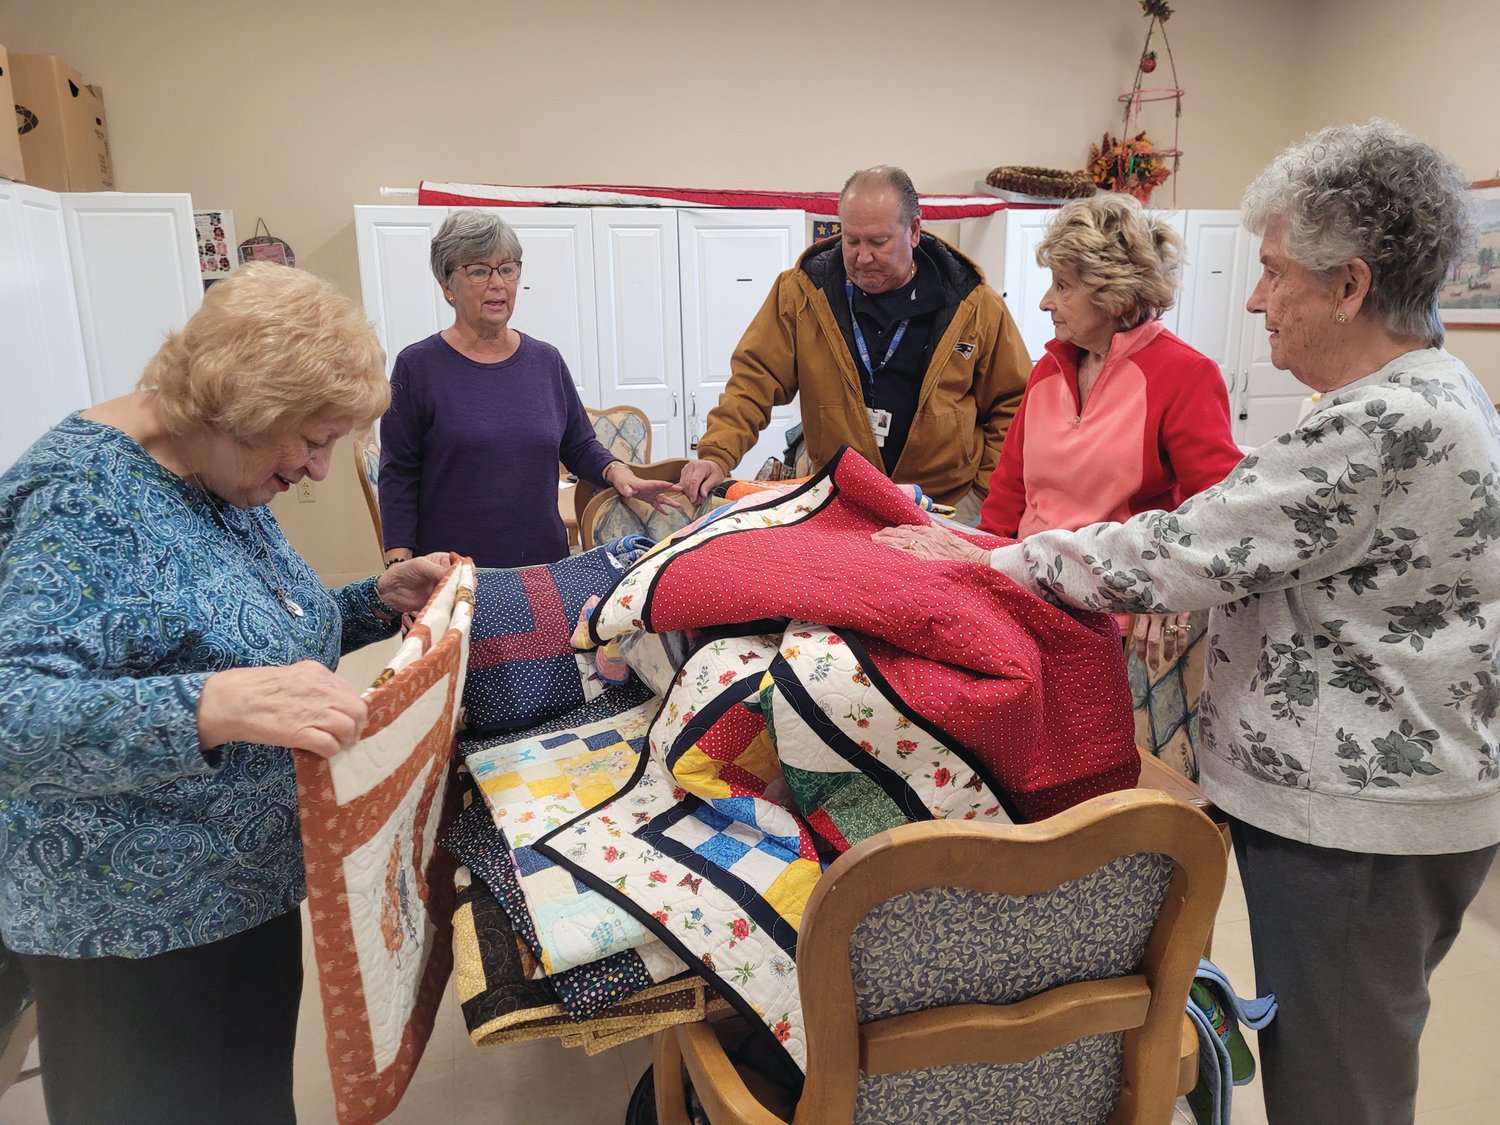 FROM THE FOLD: From left to right, Marie Lanzi, Fran Zanni, John Reis, Betty Bryda and Evelyn Cedroni fold quilts they donated to Children’s Friend and Services, for families in need.